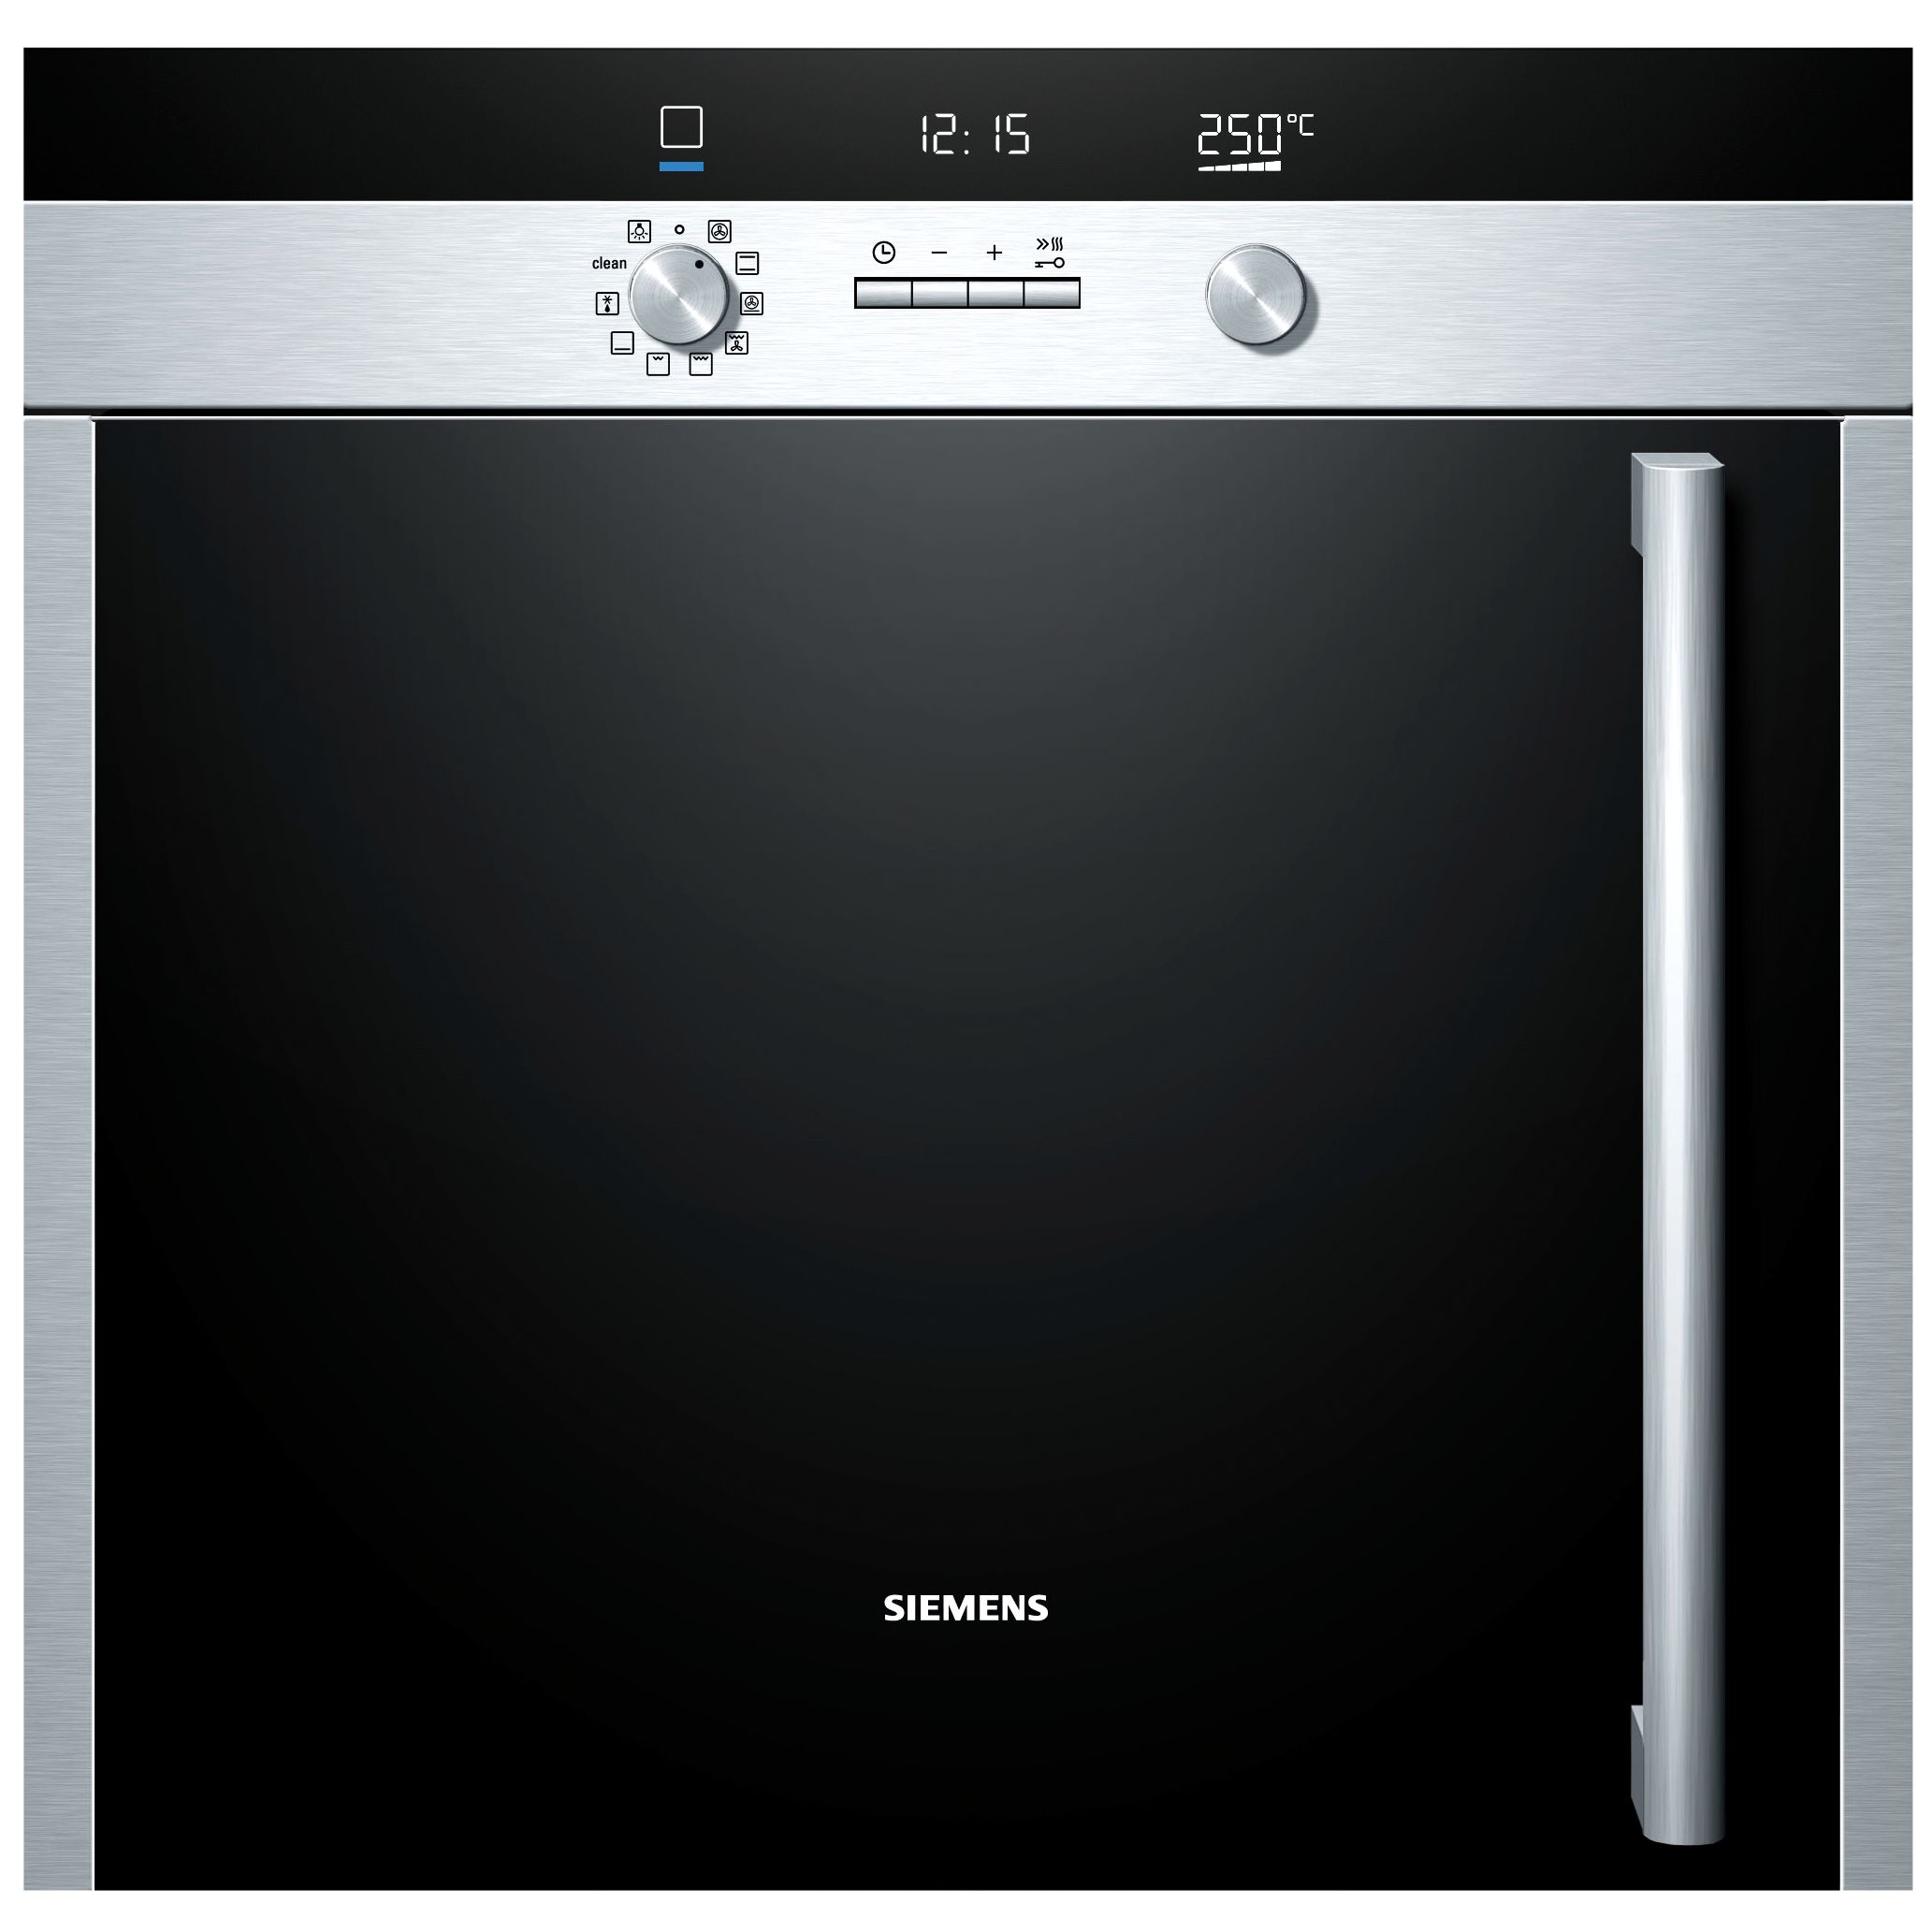 Siemens HB55LB550B Single Electric Oven, Stainless Steel at John Lewis